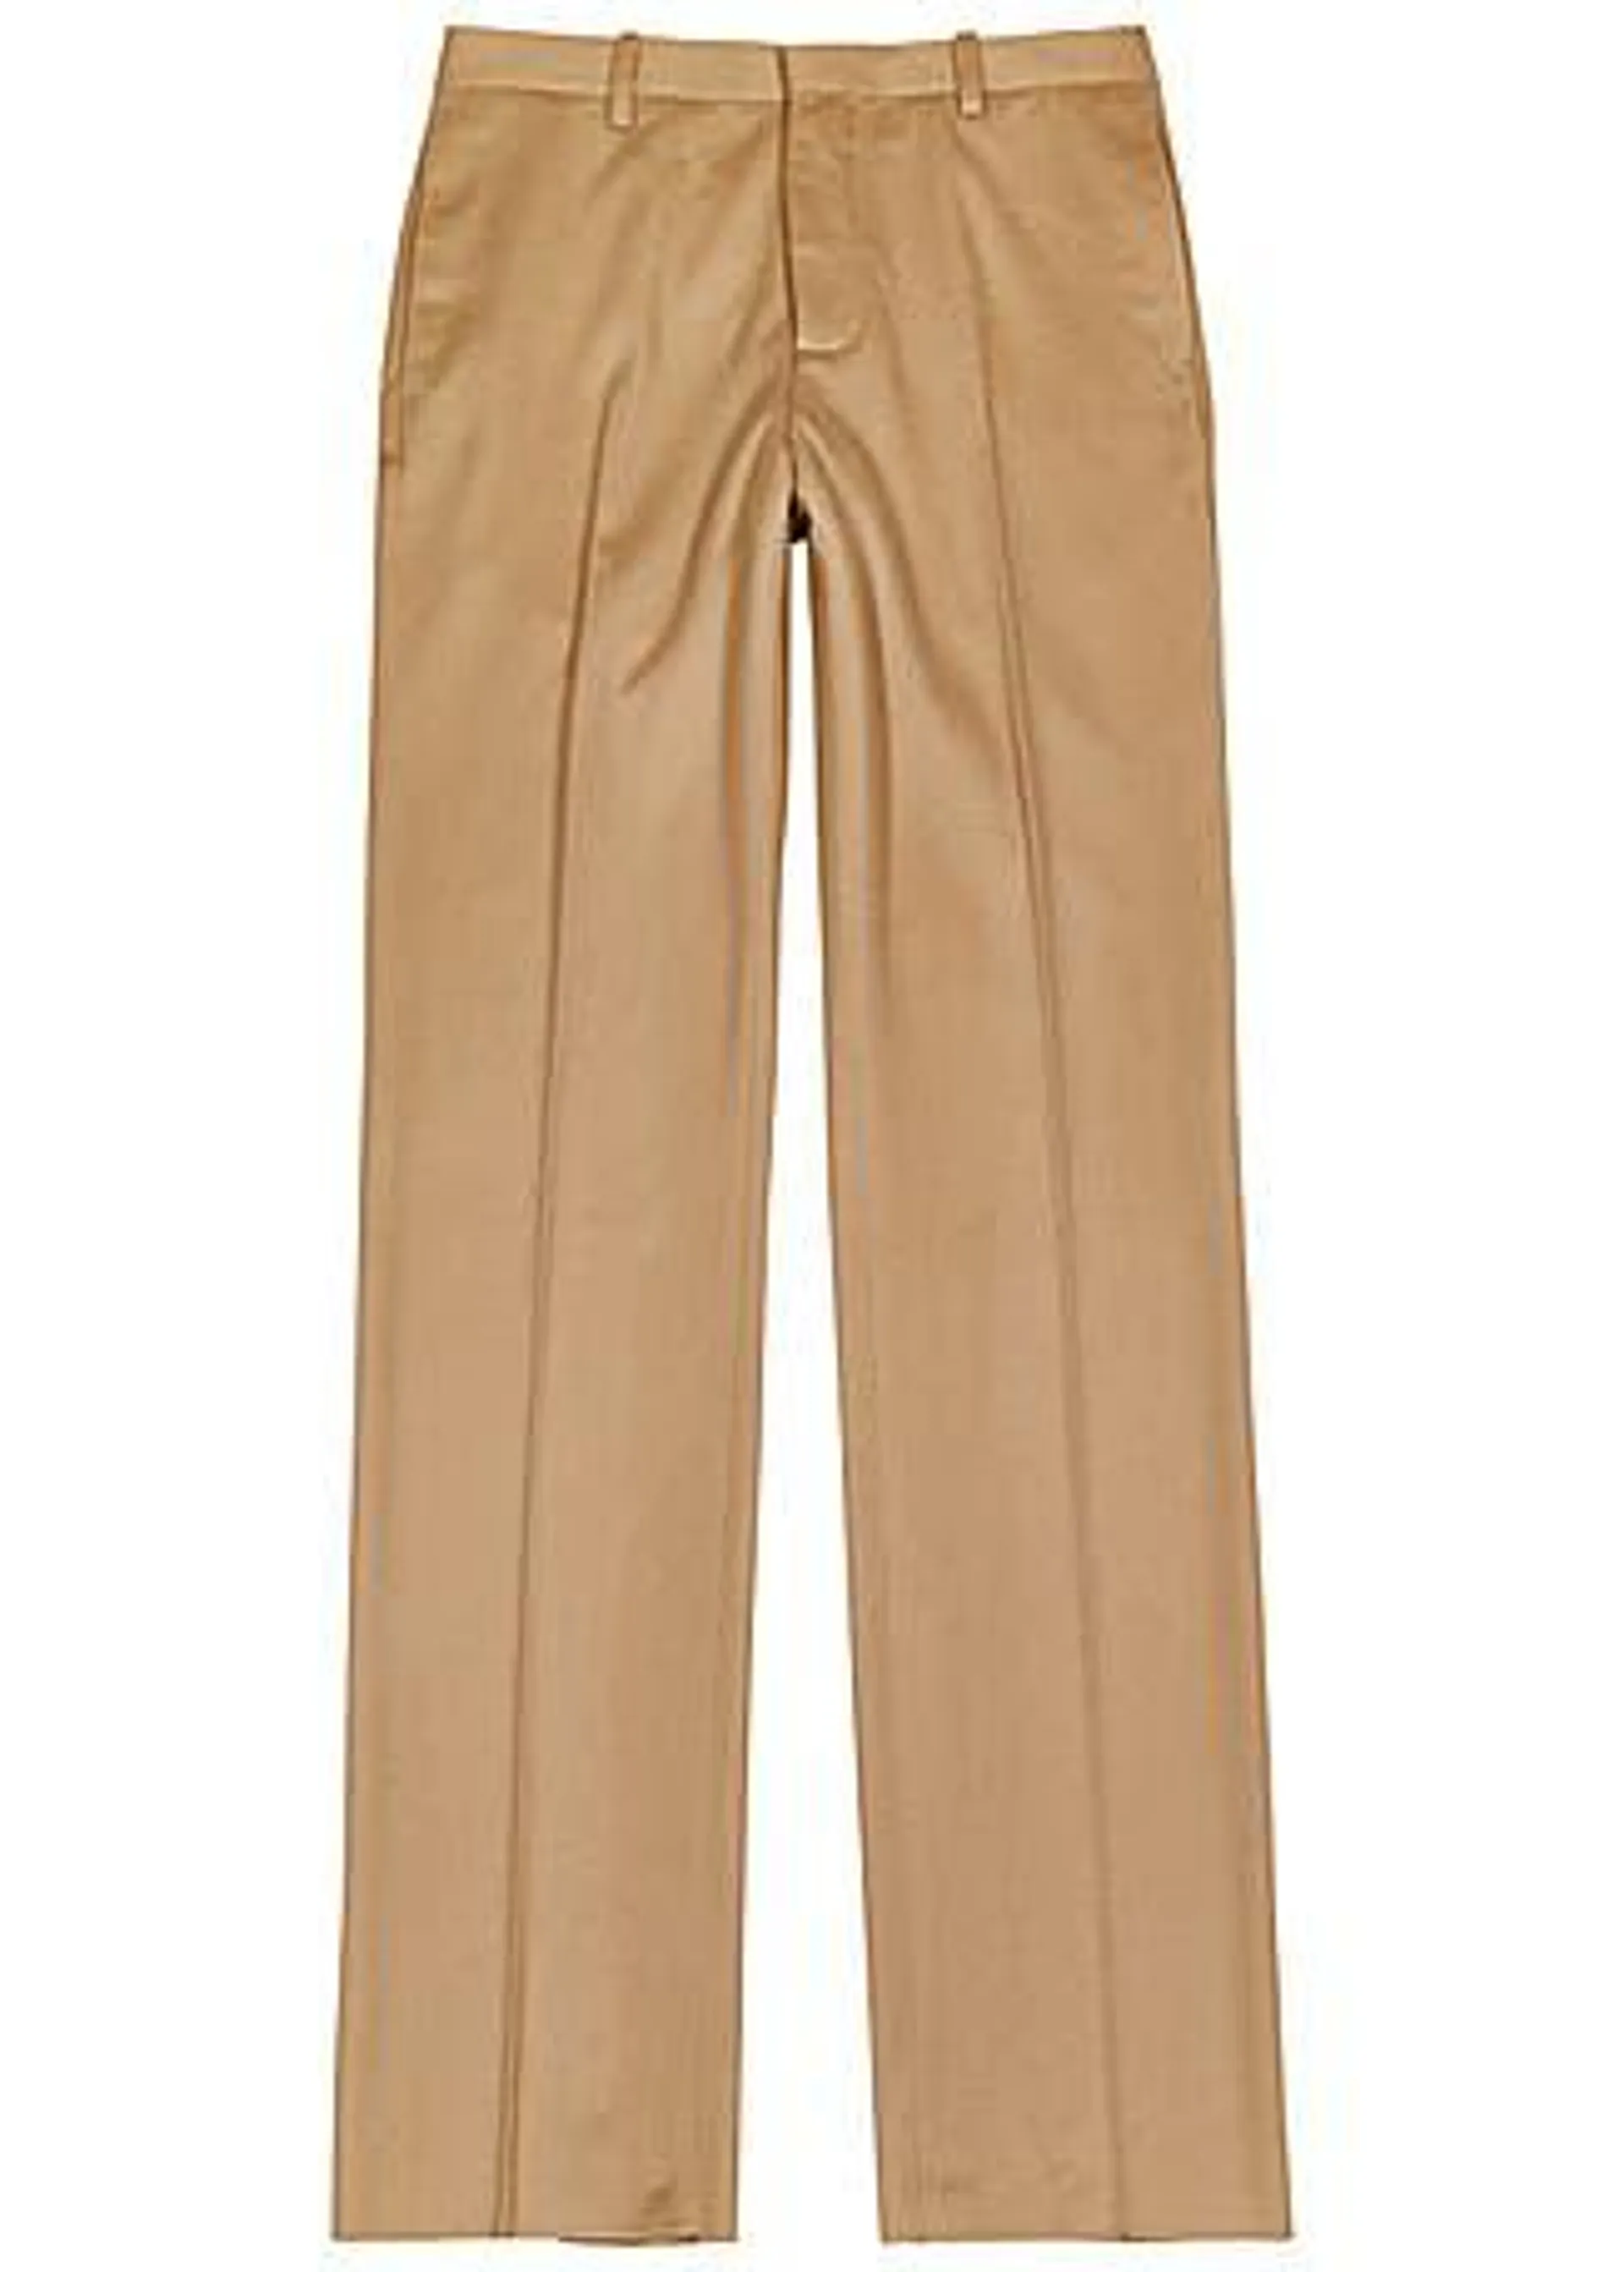 Straight-leg cashmere trousers